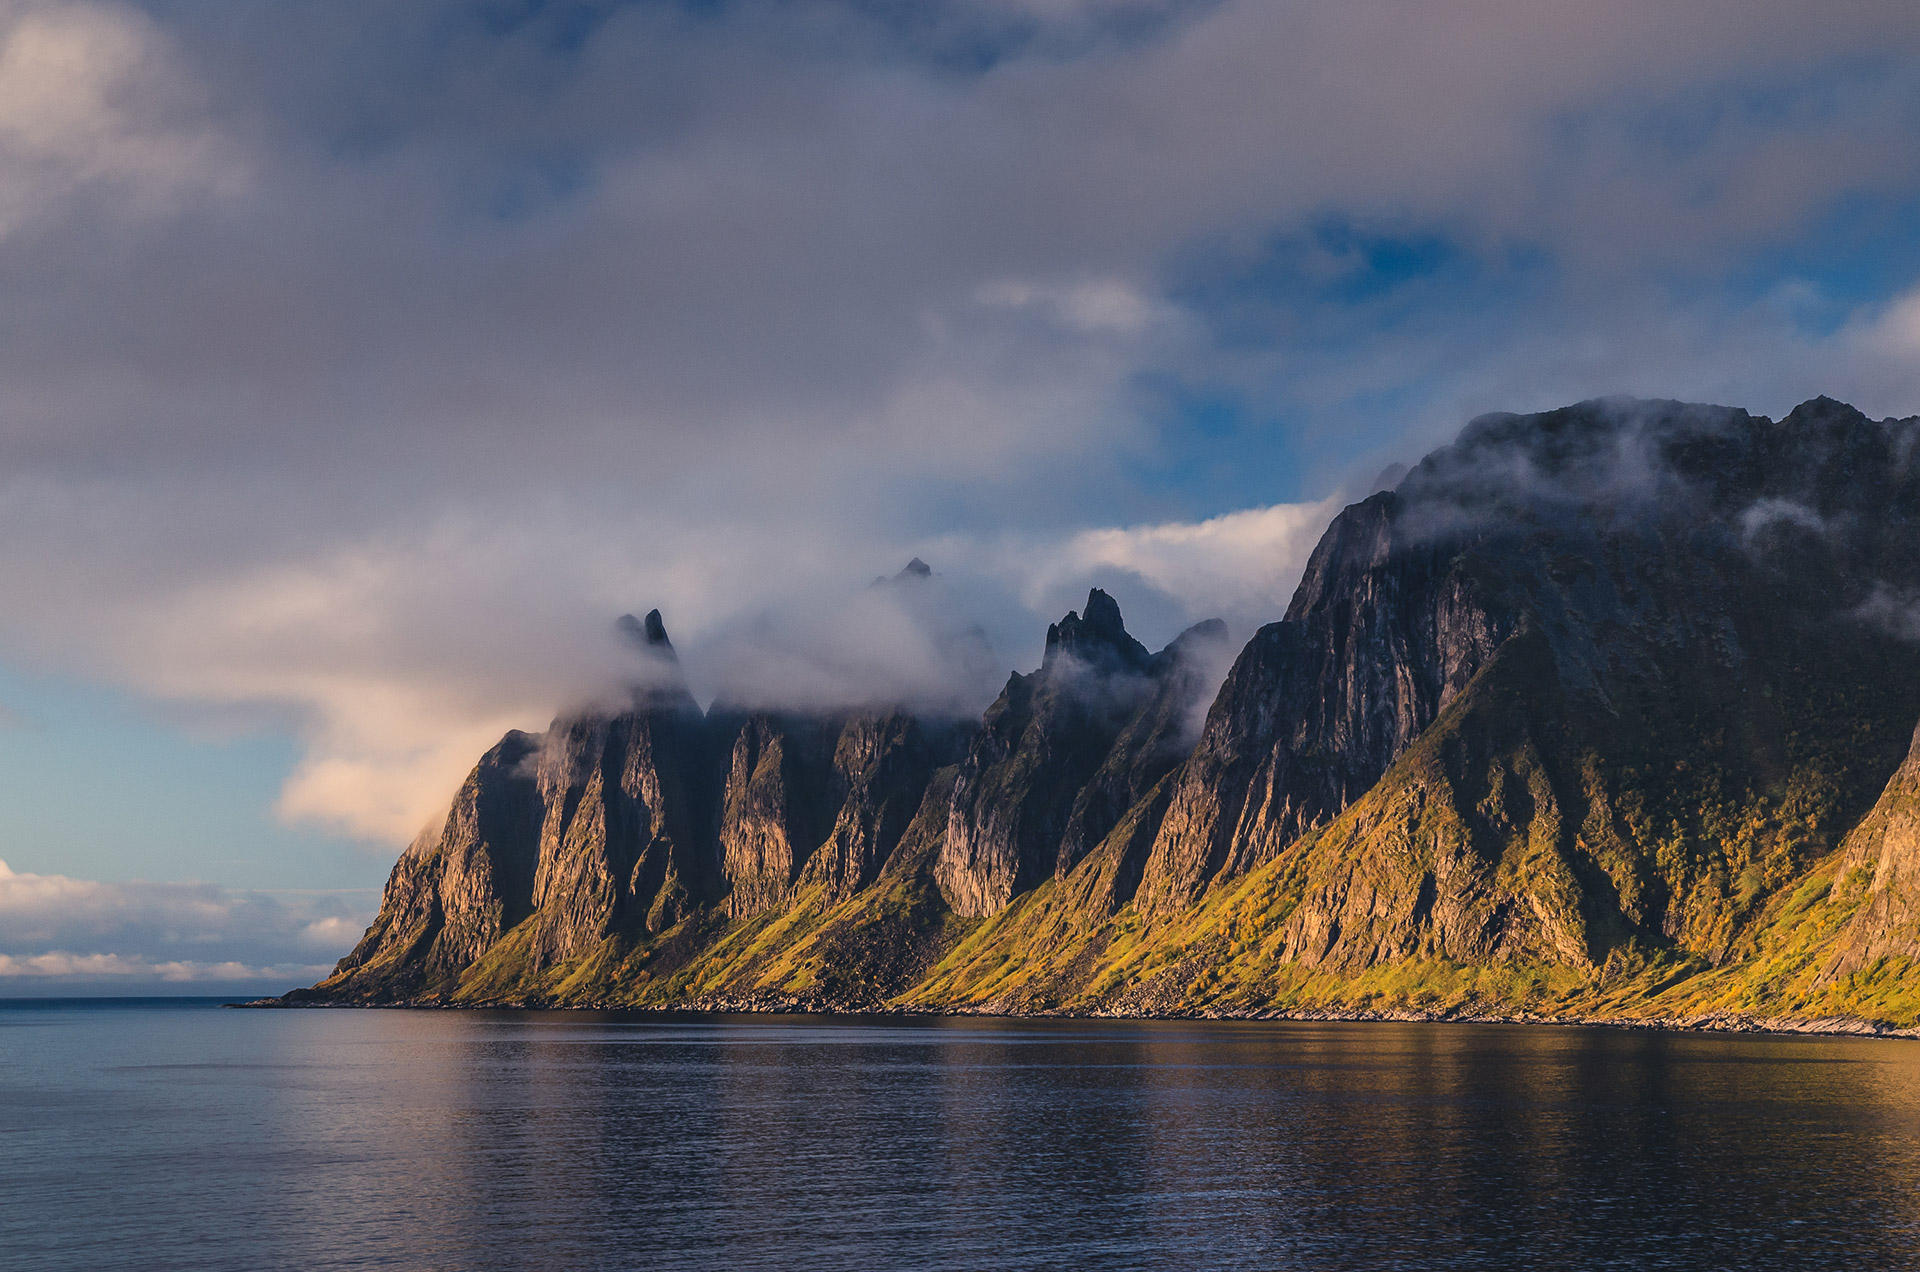 Senja is known for it's pointed peaks